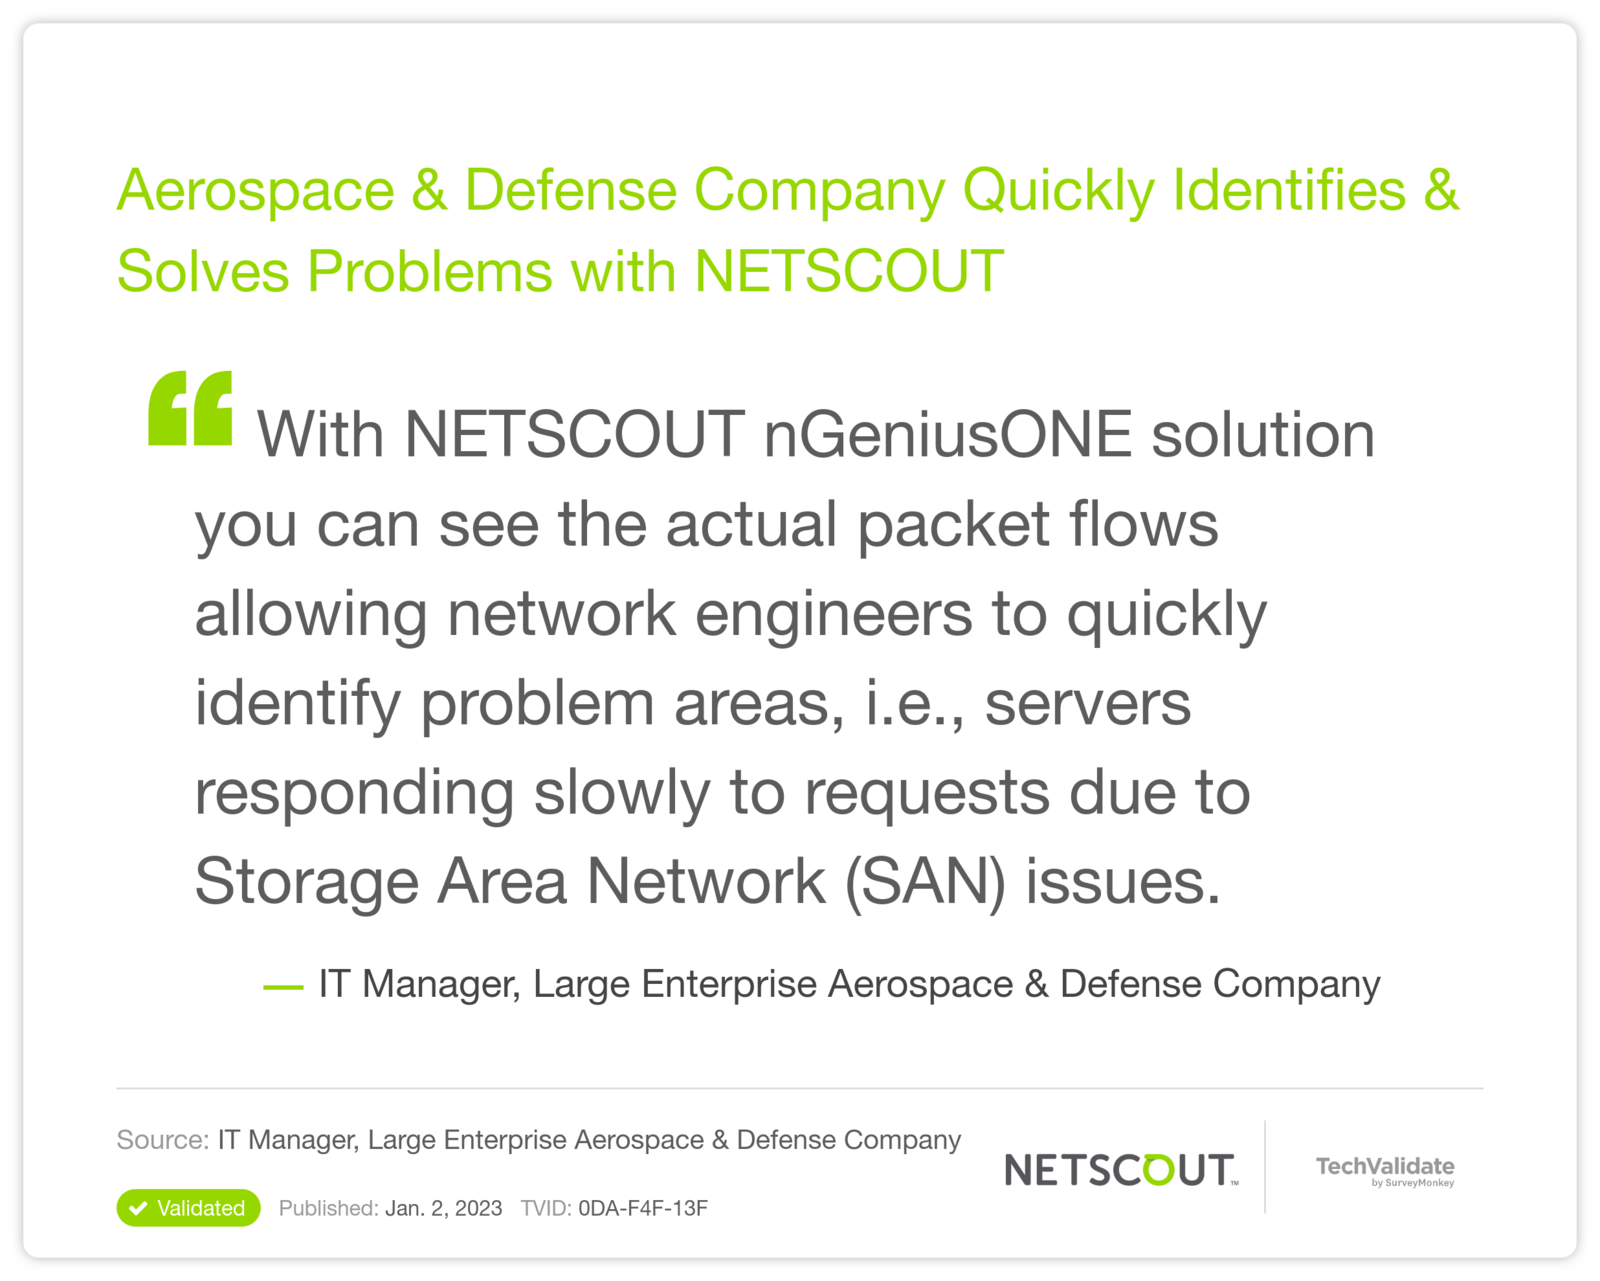 Aerospace & Defense Company Quickly Identifies & Solves Problems with NETSCOUT